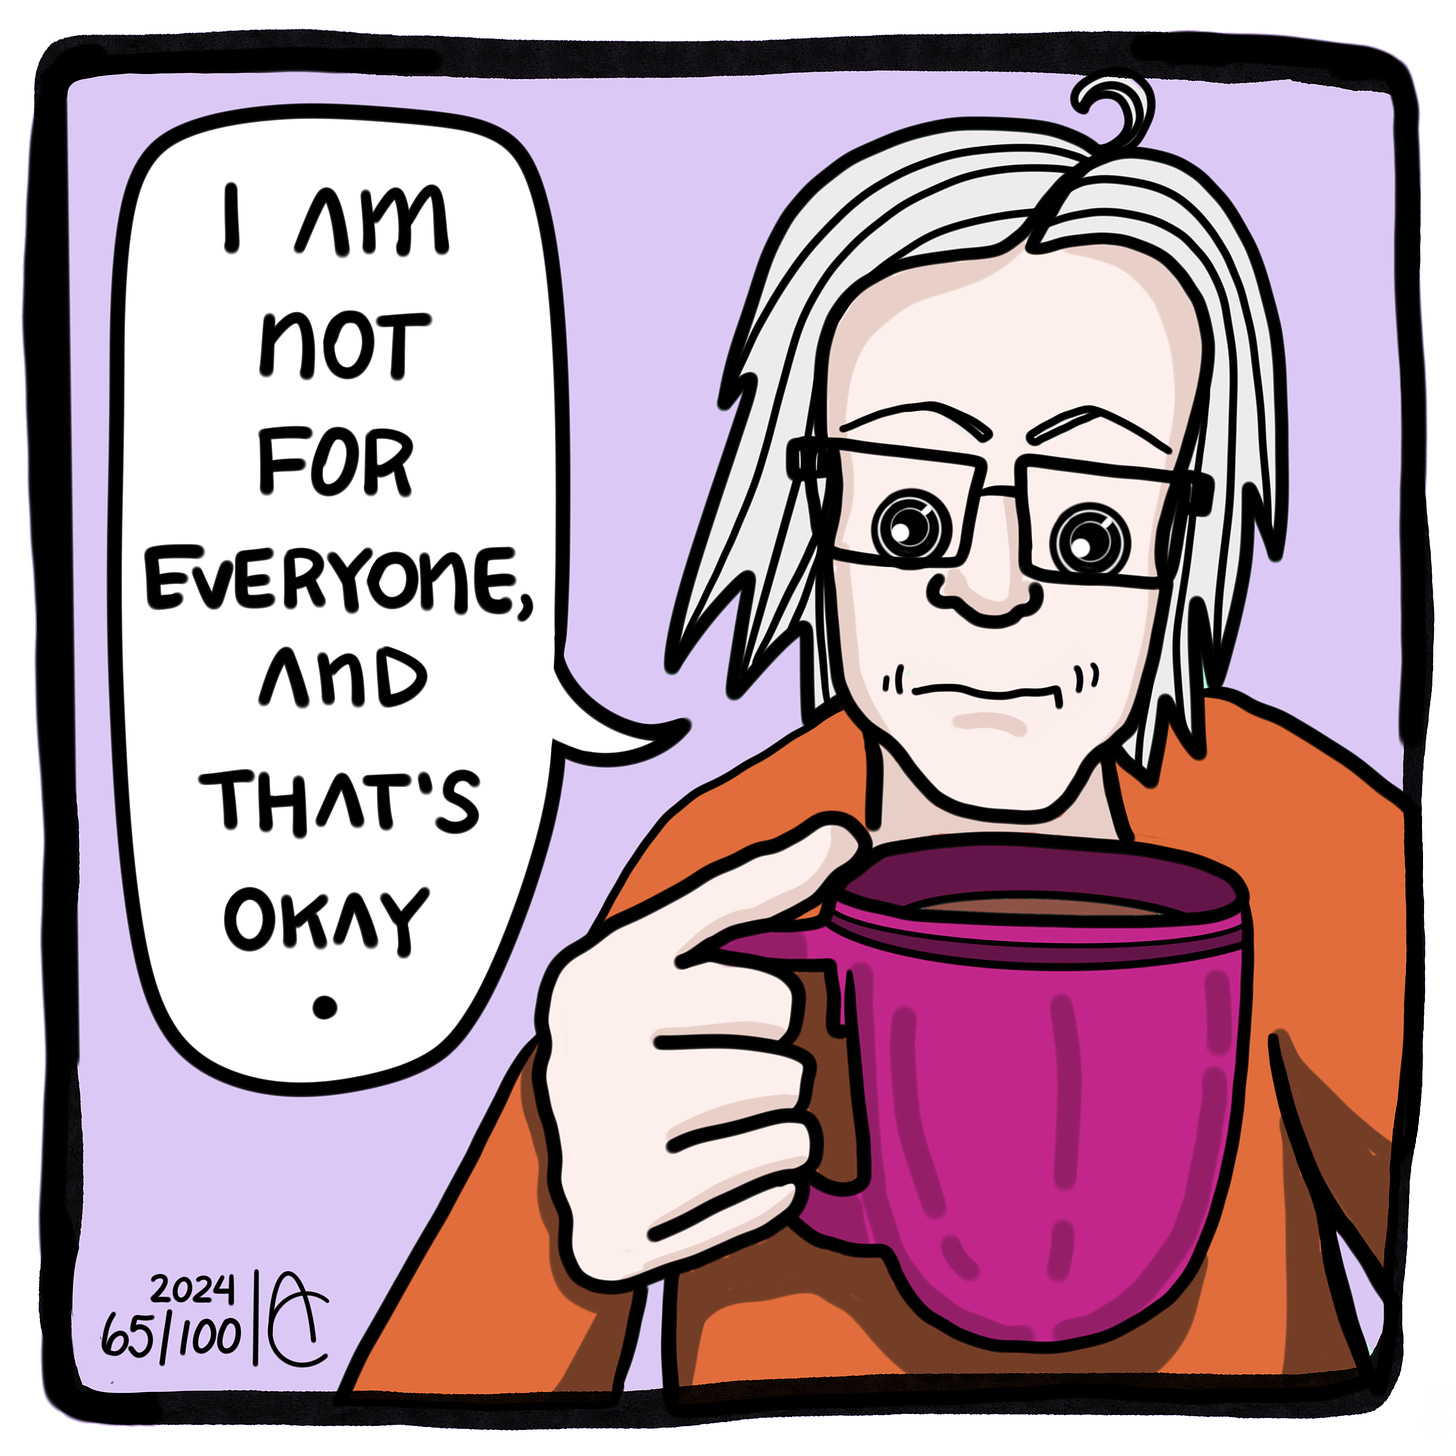 Comic affirmation with woman holding coffee cup.